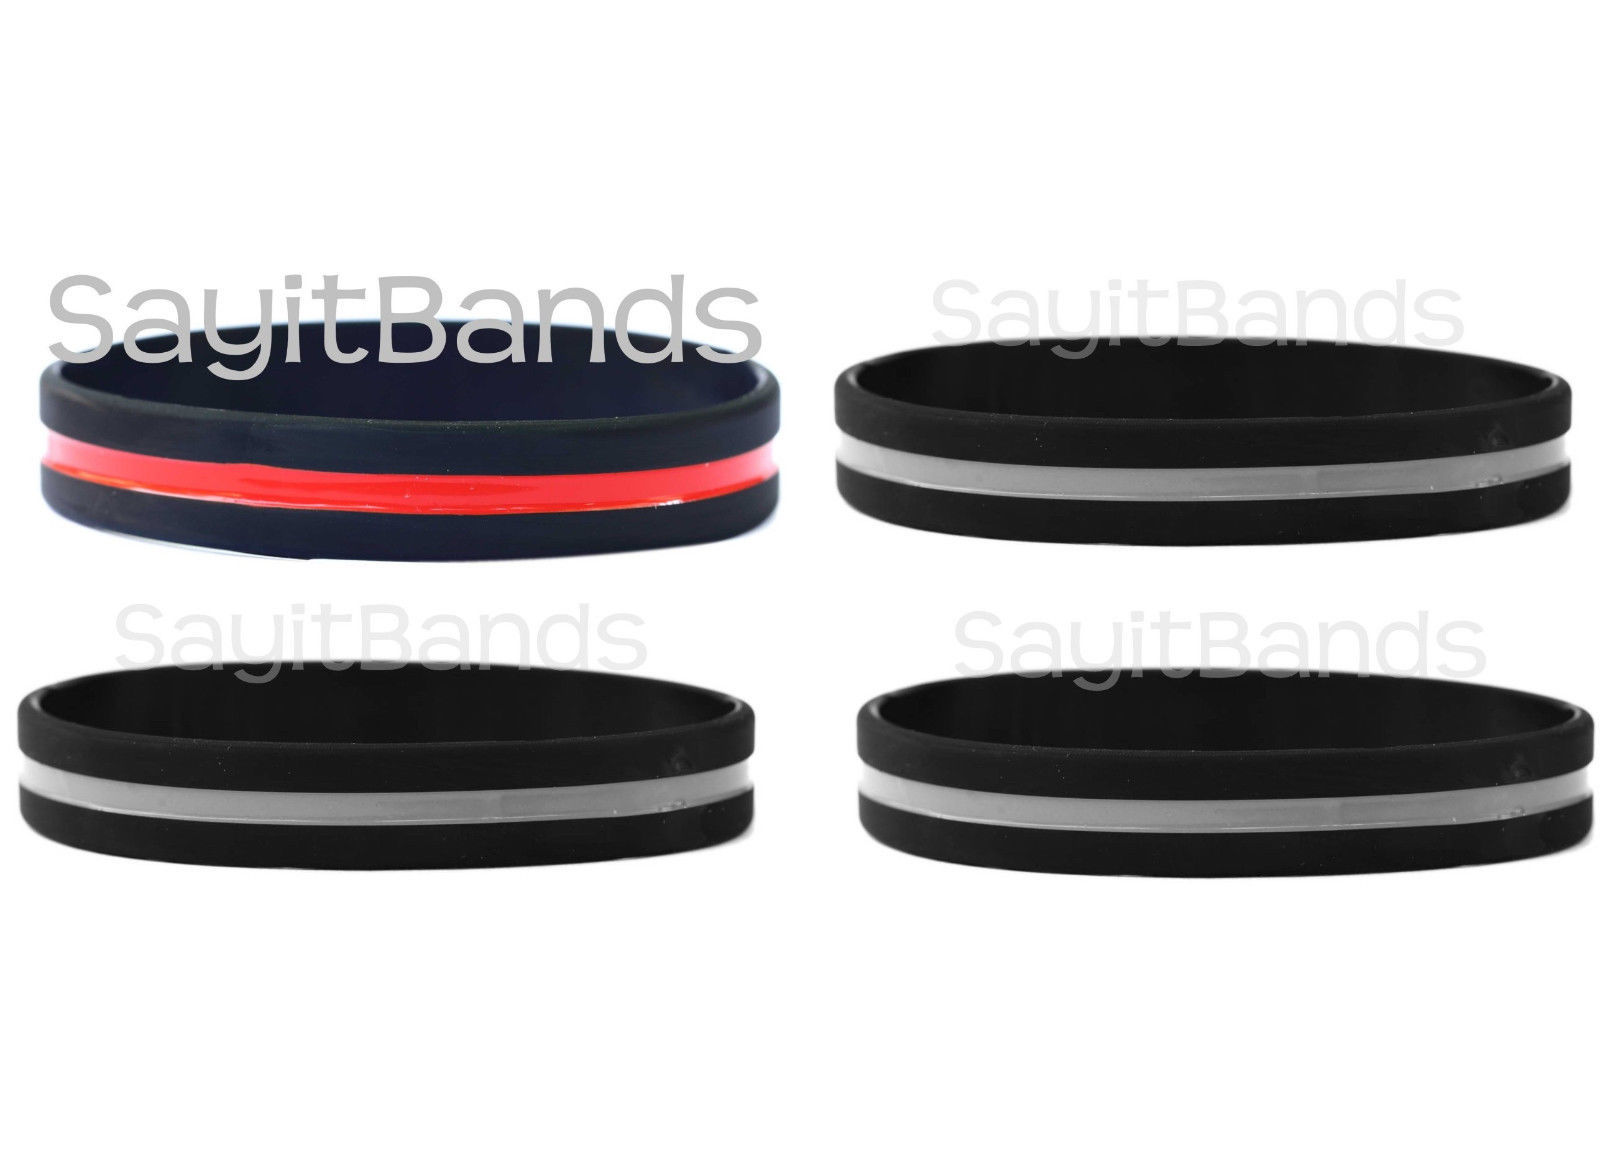 Primary image for 4 wristbands - 1 thin red line and 3 thin silver gray line wristbands